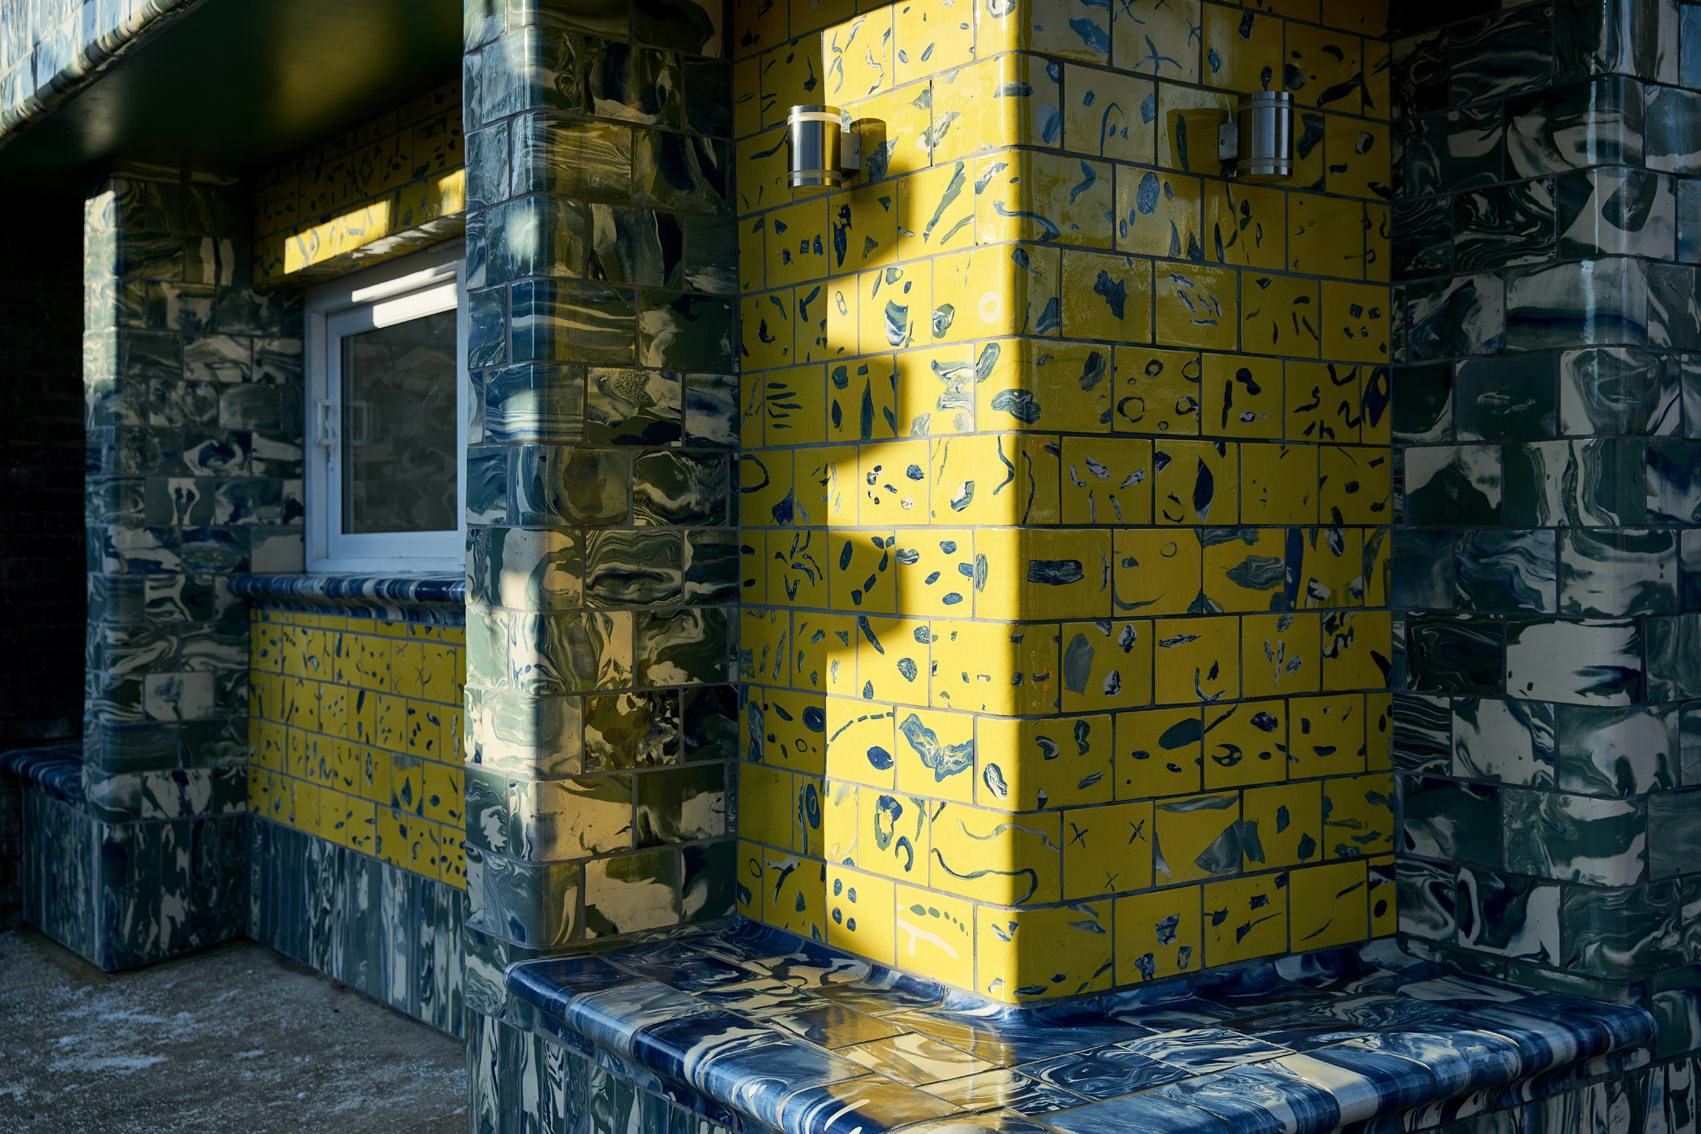 A detail showing handmade yellow and blue tiles on a transport kiosk